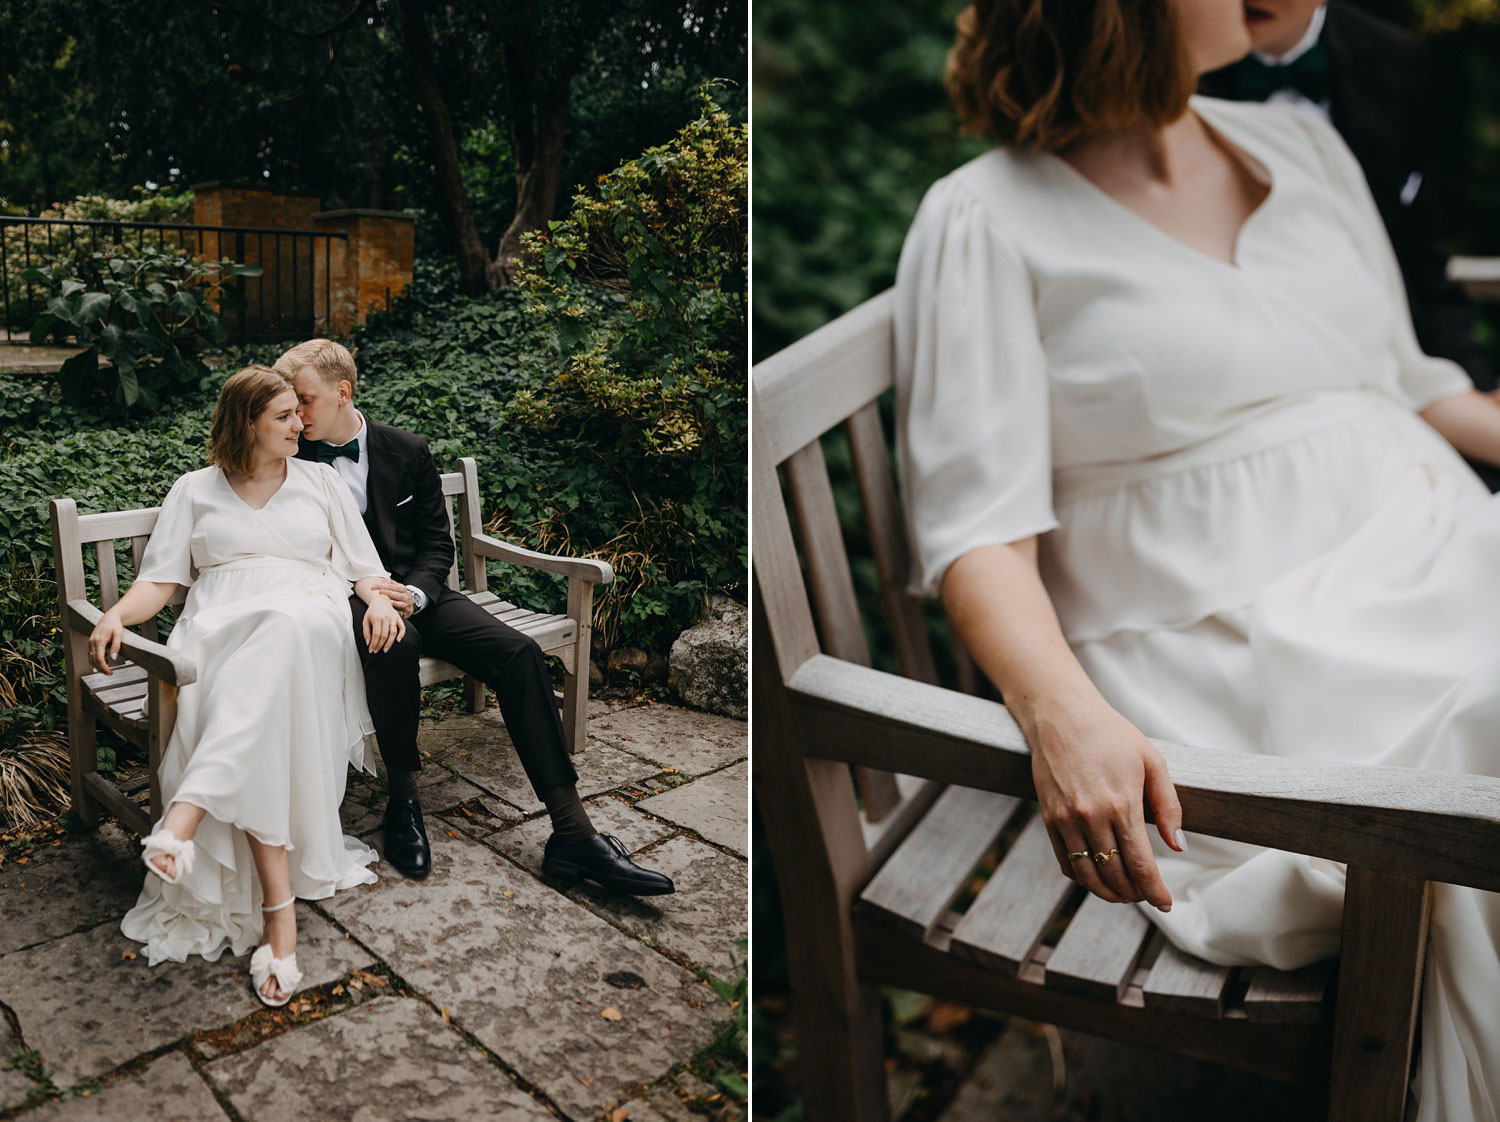 Copenhagen wedding photographer captures a natural shot of a bride and groom sitting and embracing on a bench in Frederiksberg Have